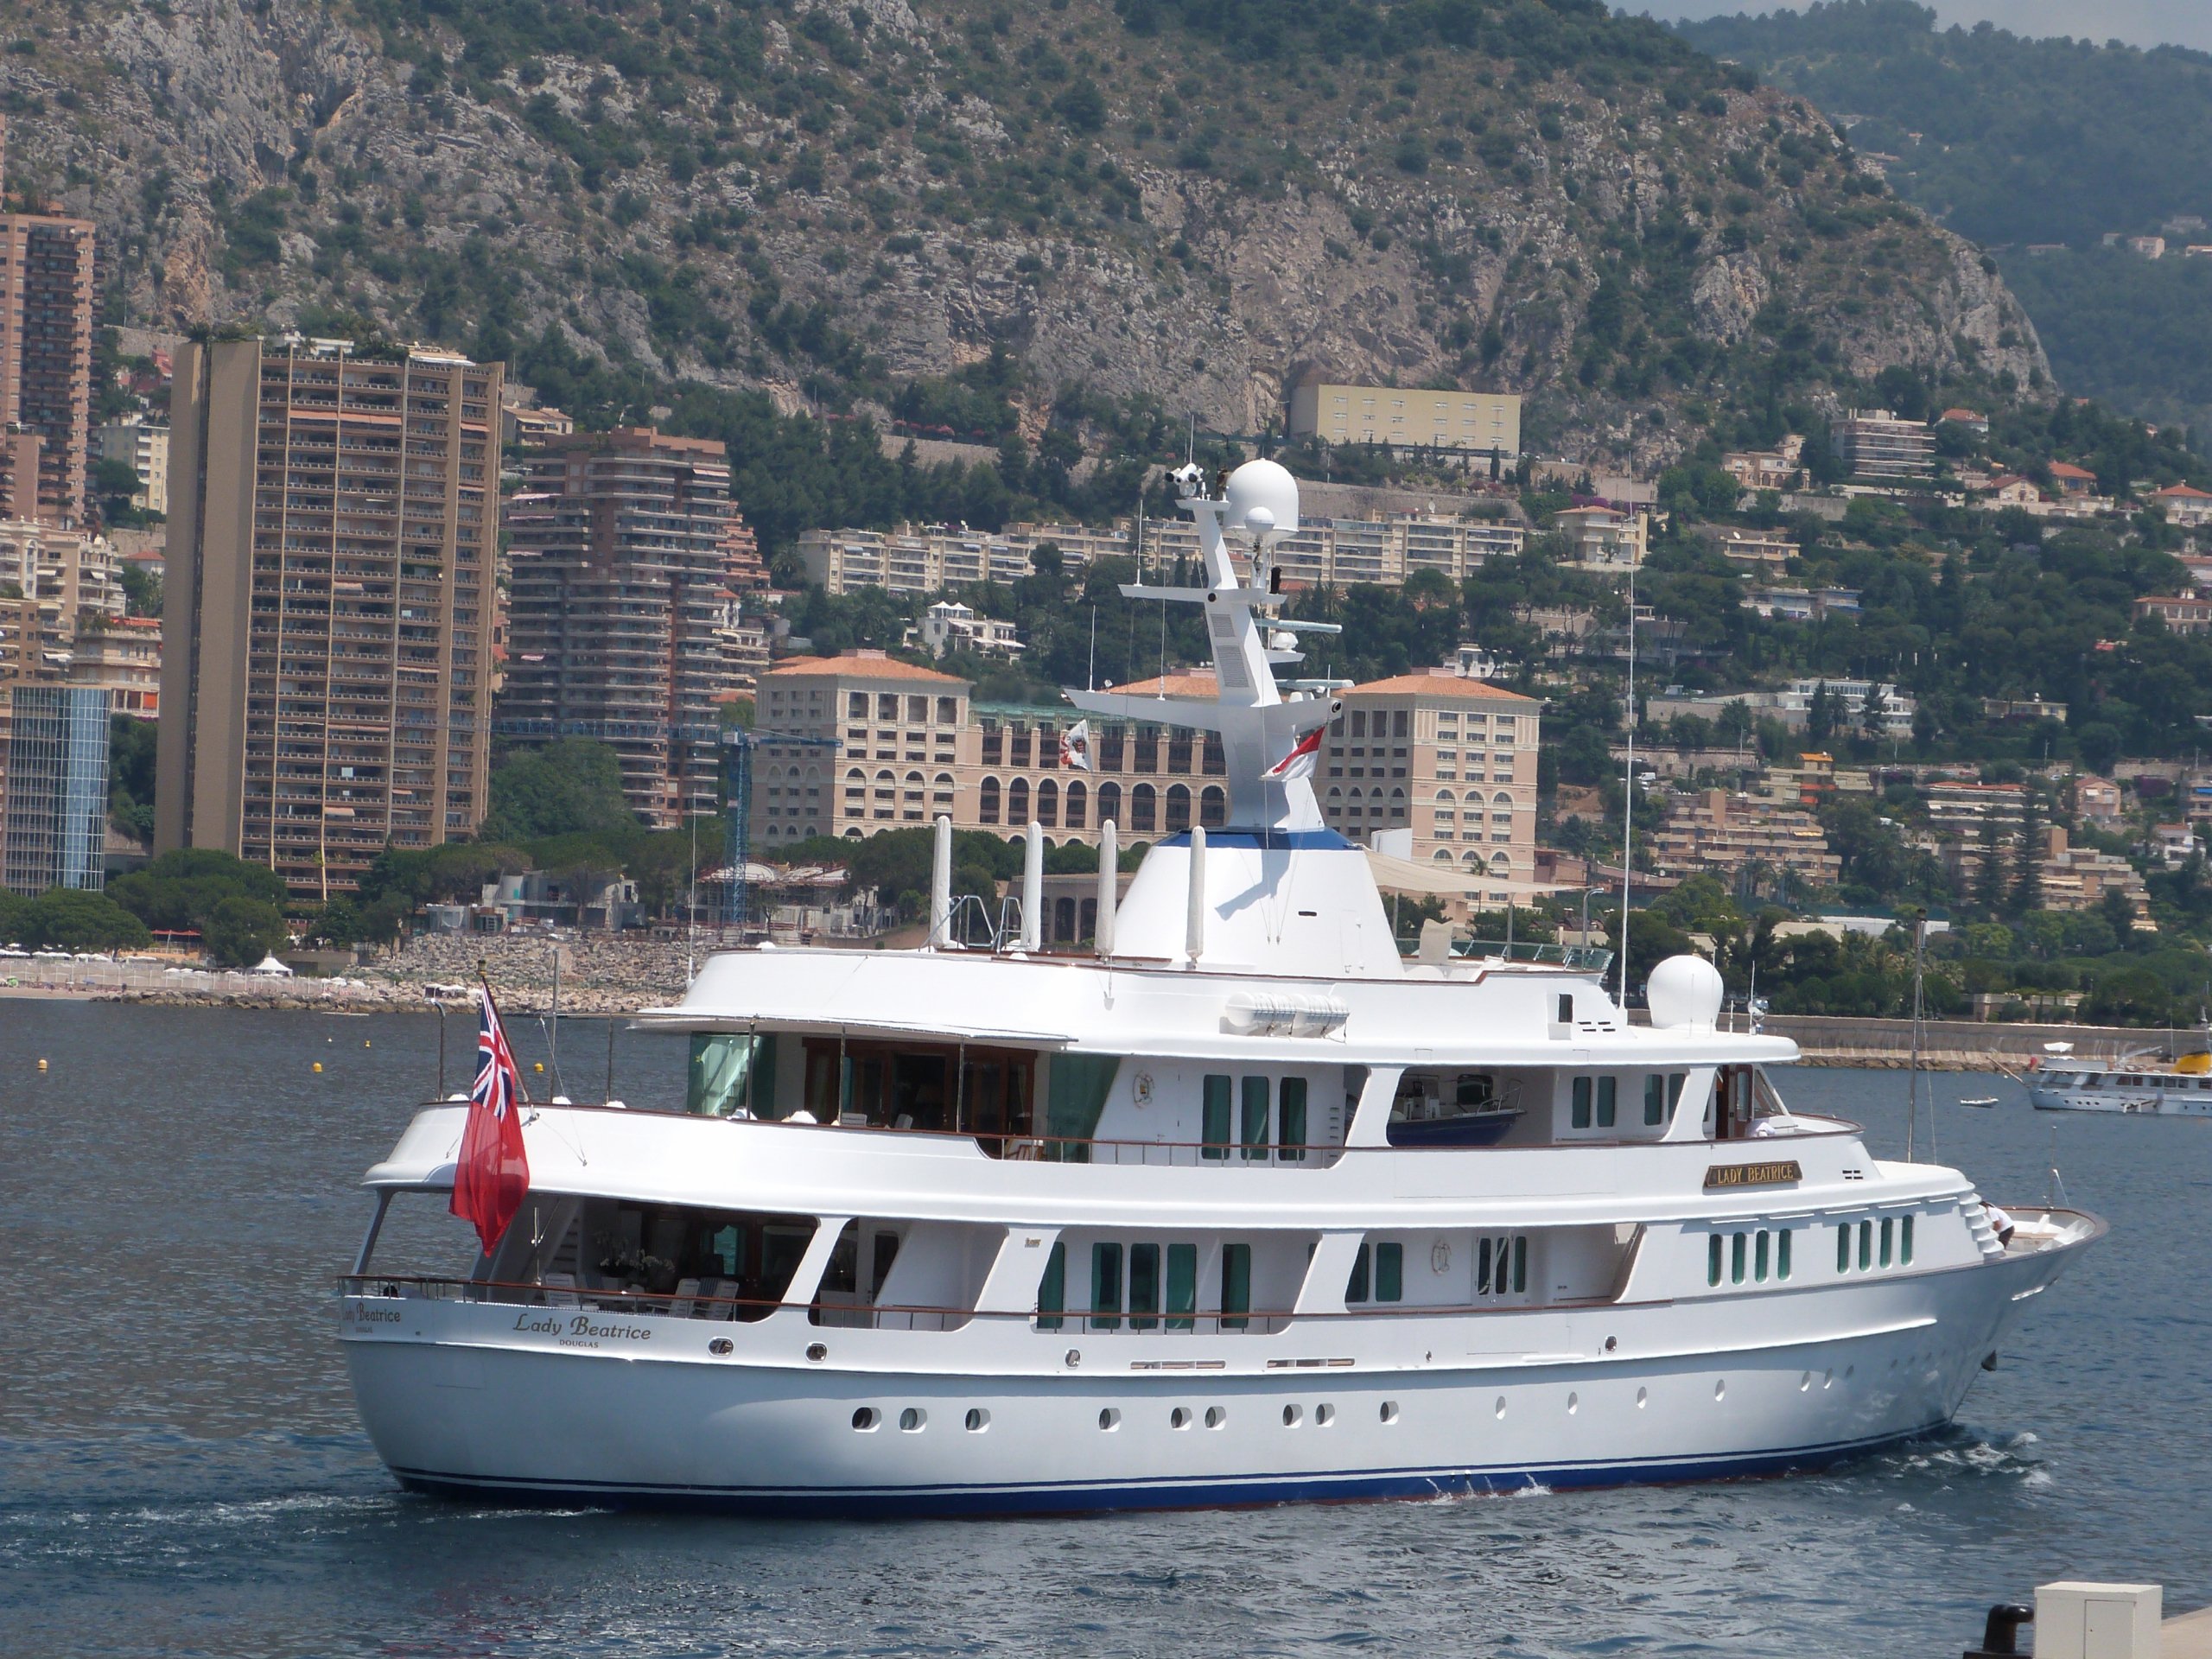 LADY BEATRICE Yacht • Feadship • 1993 • propriétaires Barclay Brothers